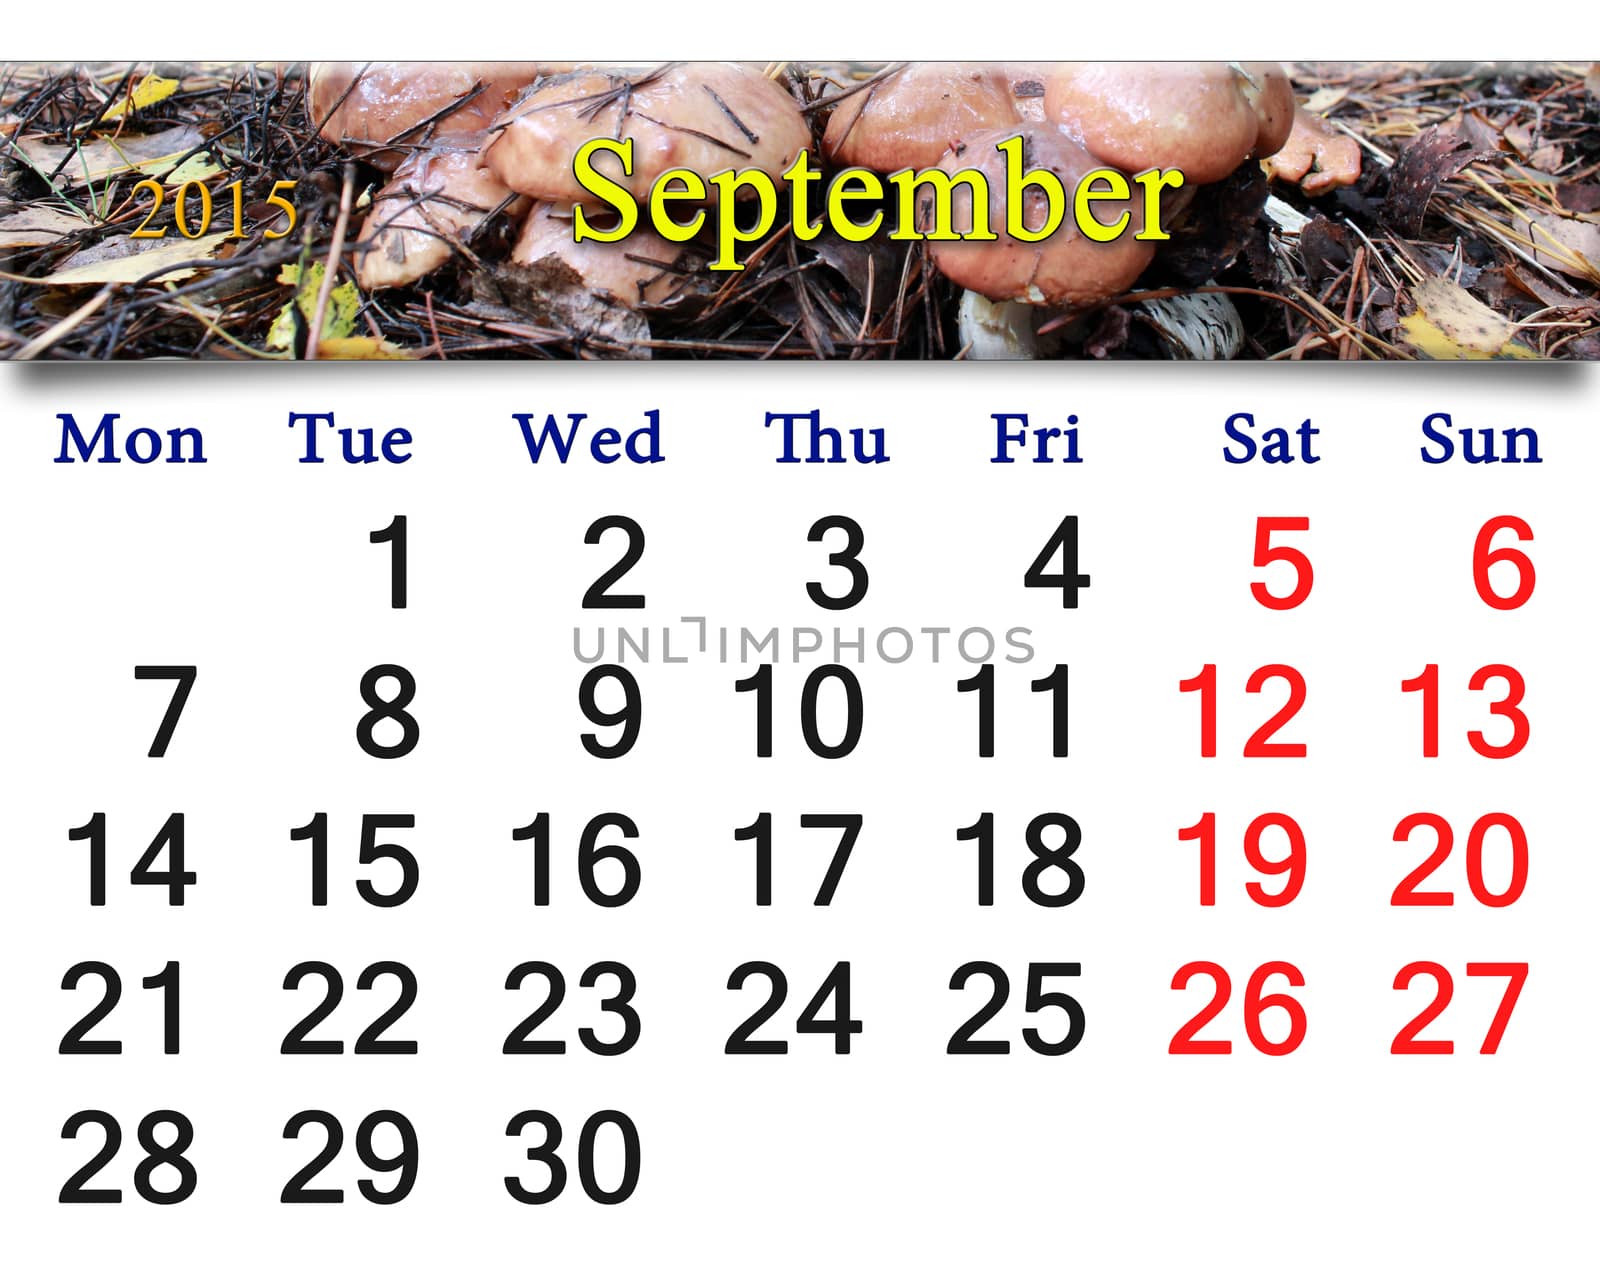 calendar for September of 2015 with image of autumn mushrooms